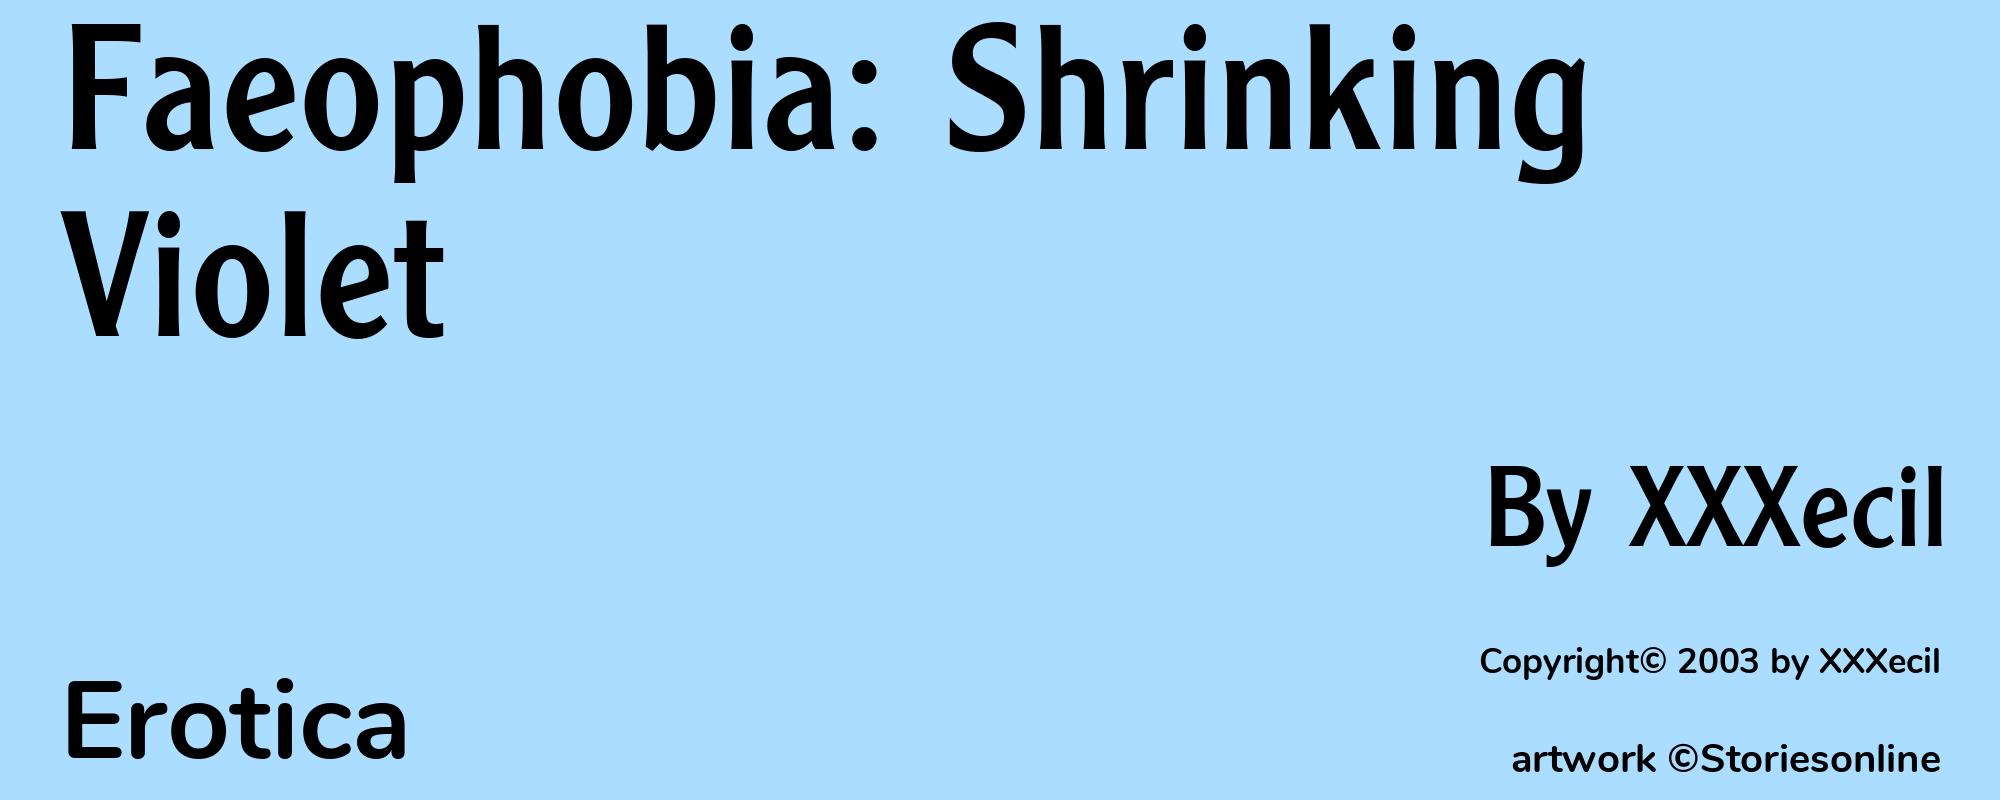 Faeophobia: Shrinking Violet - Cover